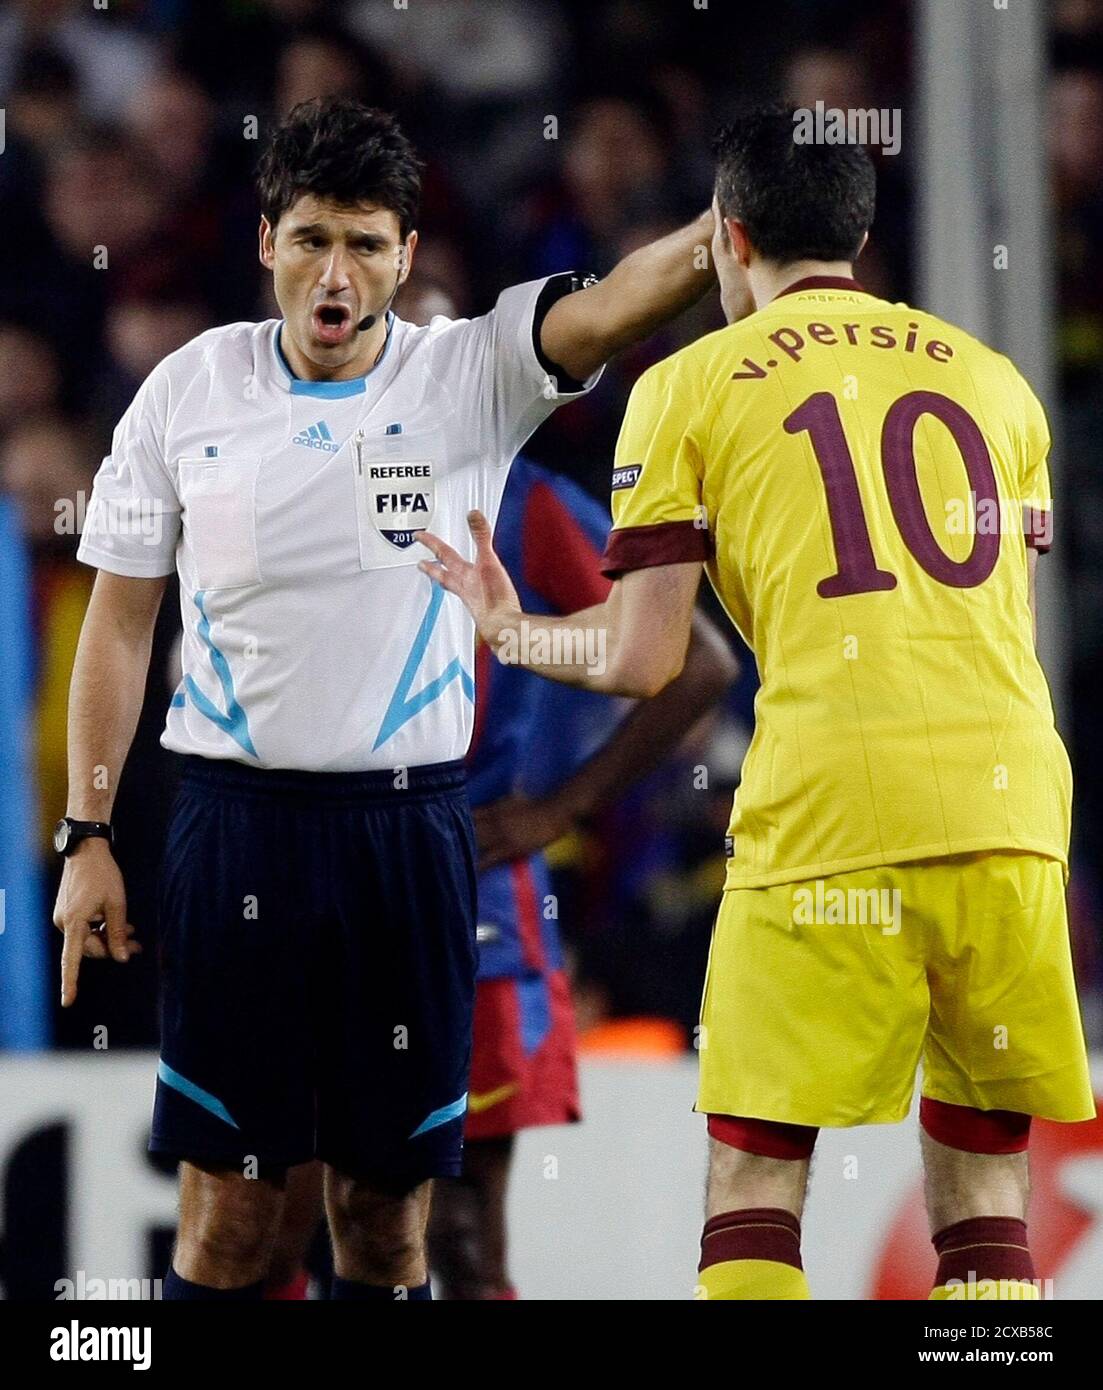 Arsenal's Robin van Persie (10) reacts to Swiss referee Massimo Busacca  after receiving a red card during their Champions League soccer match  against Barcelona at Nou Camp stadium in Barcelona March 8,